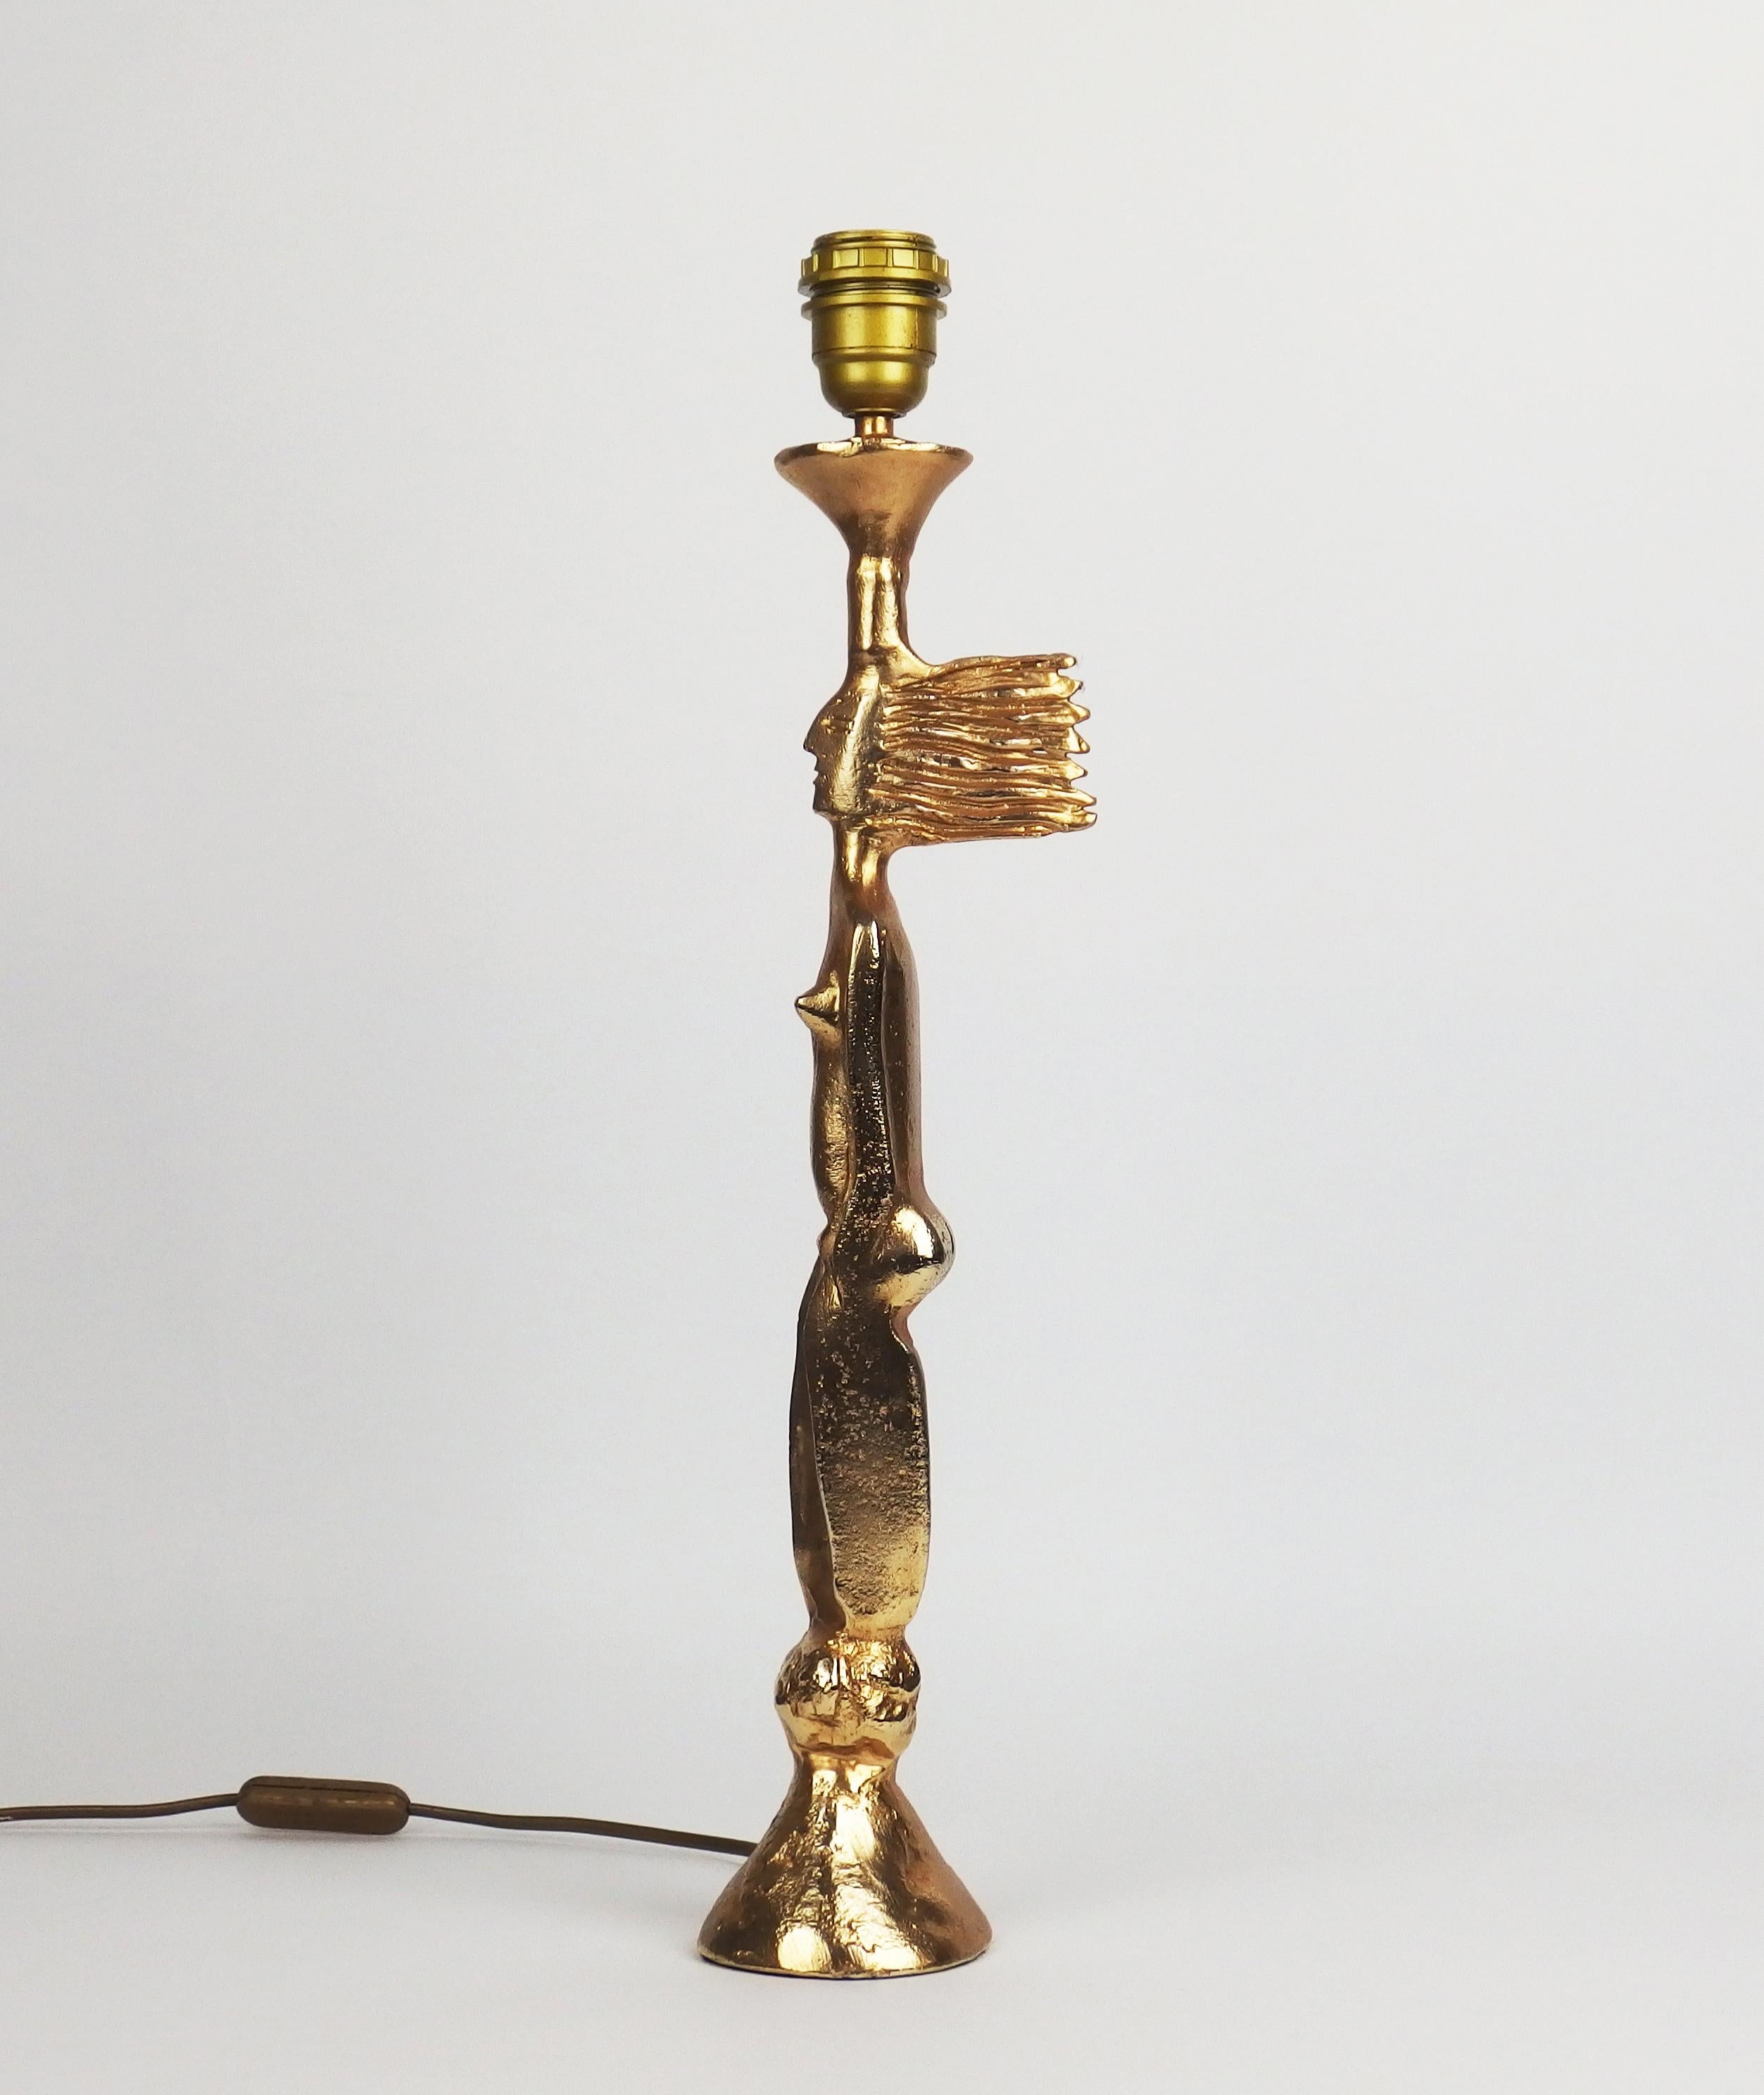 A gilt metal sculptural table lamp created by Pierre Casenove and edited by Fondica in the 1980s. Signed.
Dimensions without the shade: Height 18.89 in, width 3.93 in, depth 3.93 in.